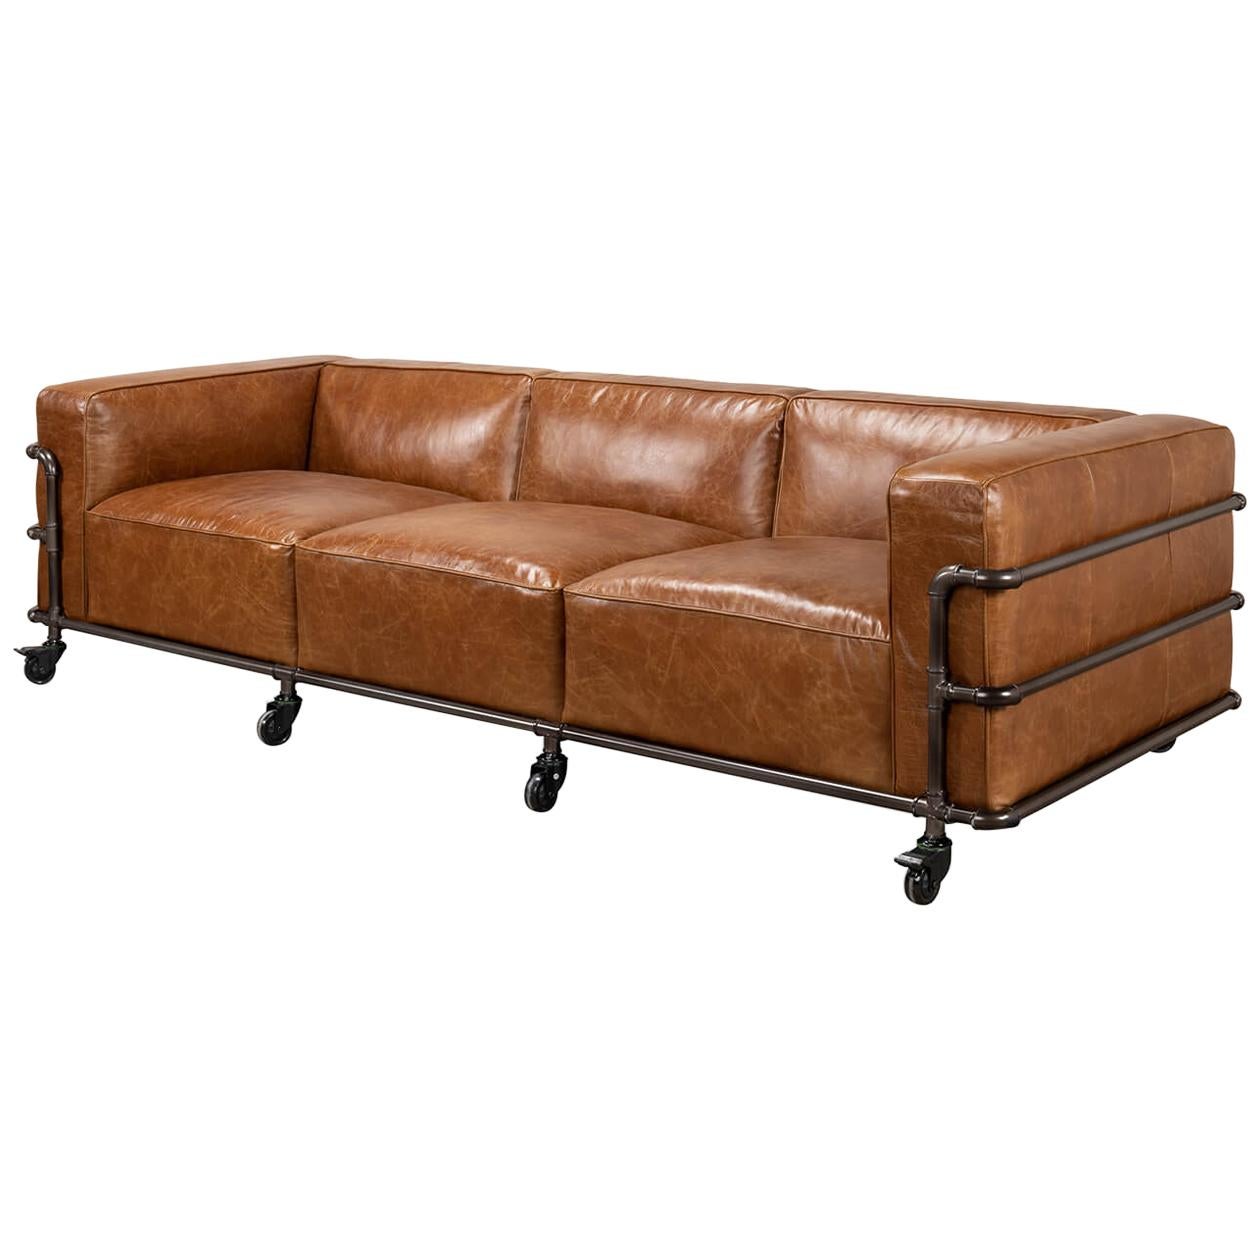 British Industrial Leather Sofa For Sale